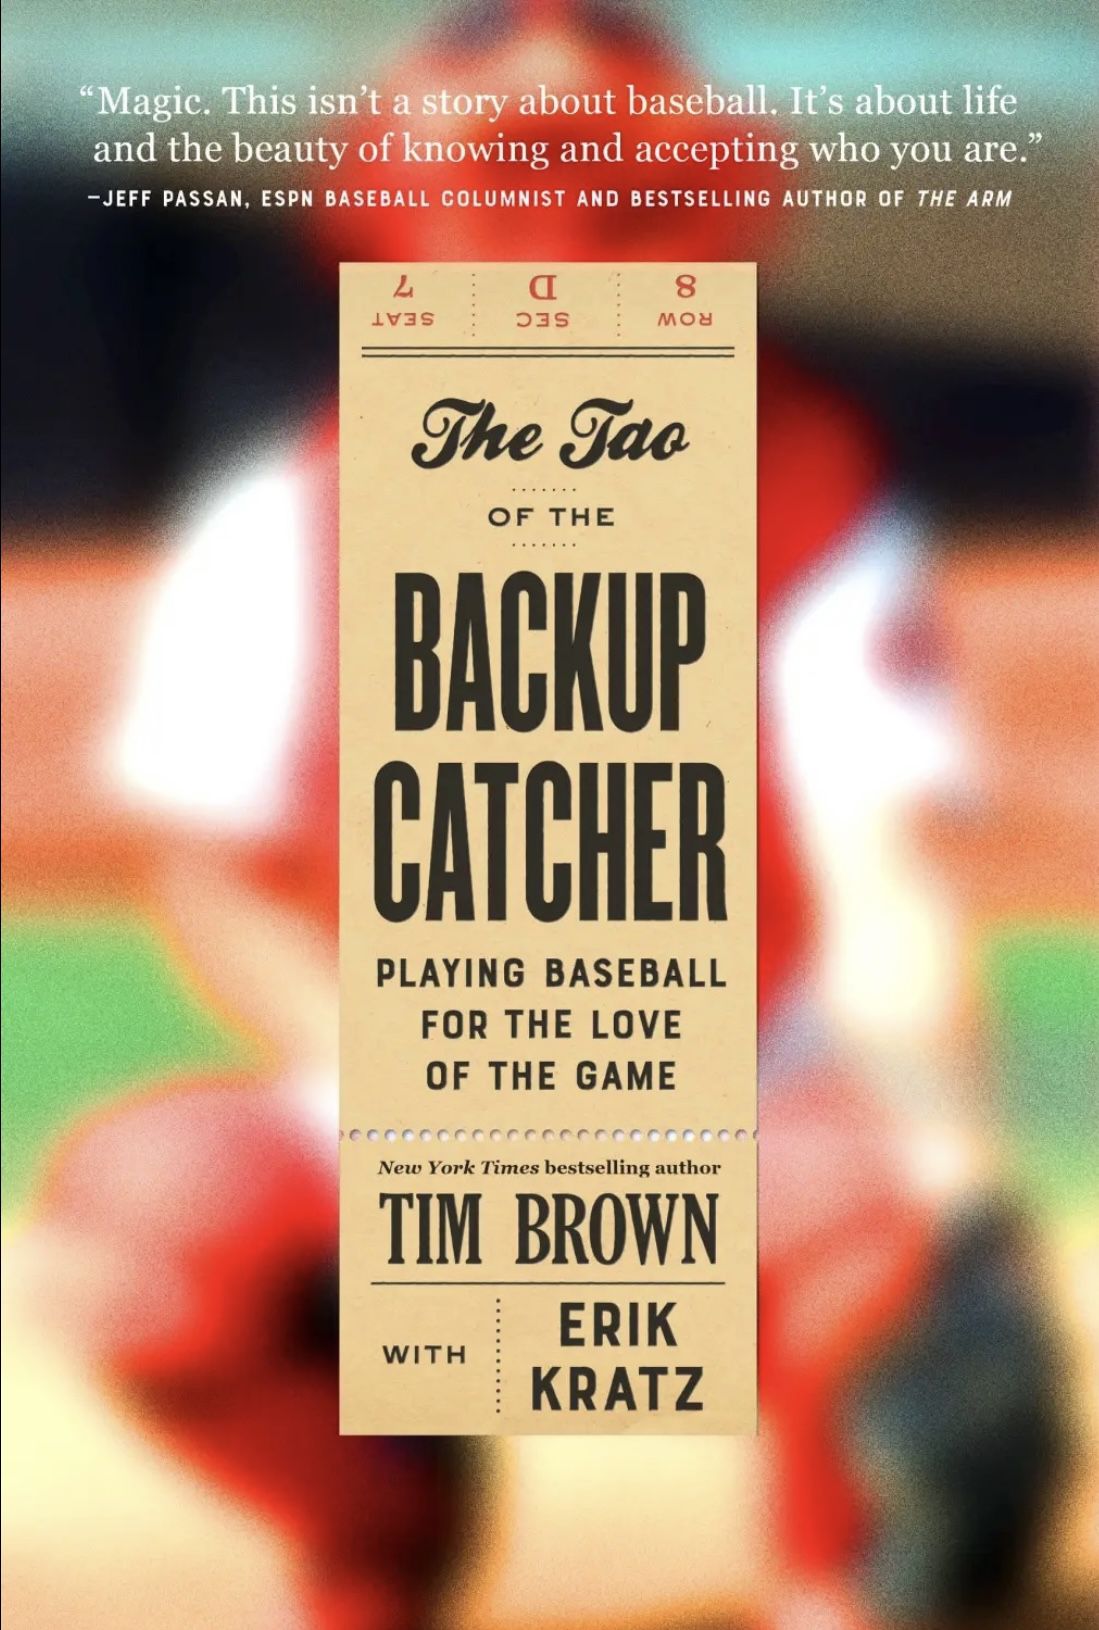 This is the book’s cover. It has a blurred photo of a catcher — presumably Kratz — wearing read catching great. The book’s title appears in a beige box superimposed over the photo. The box is shaped like a ticket stub. 